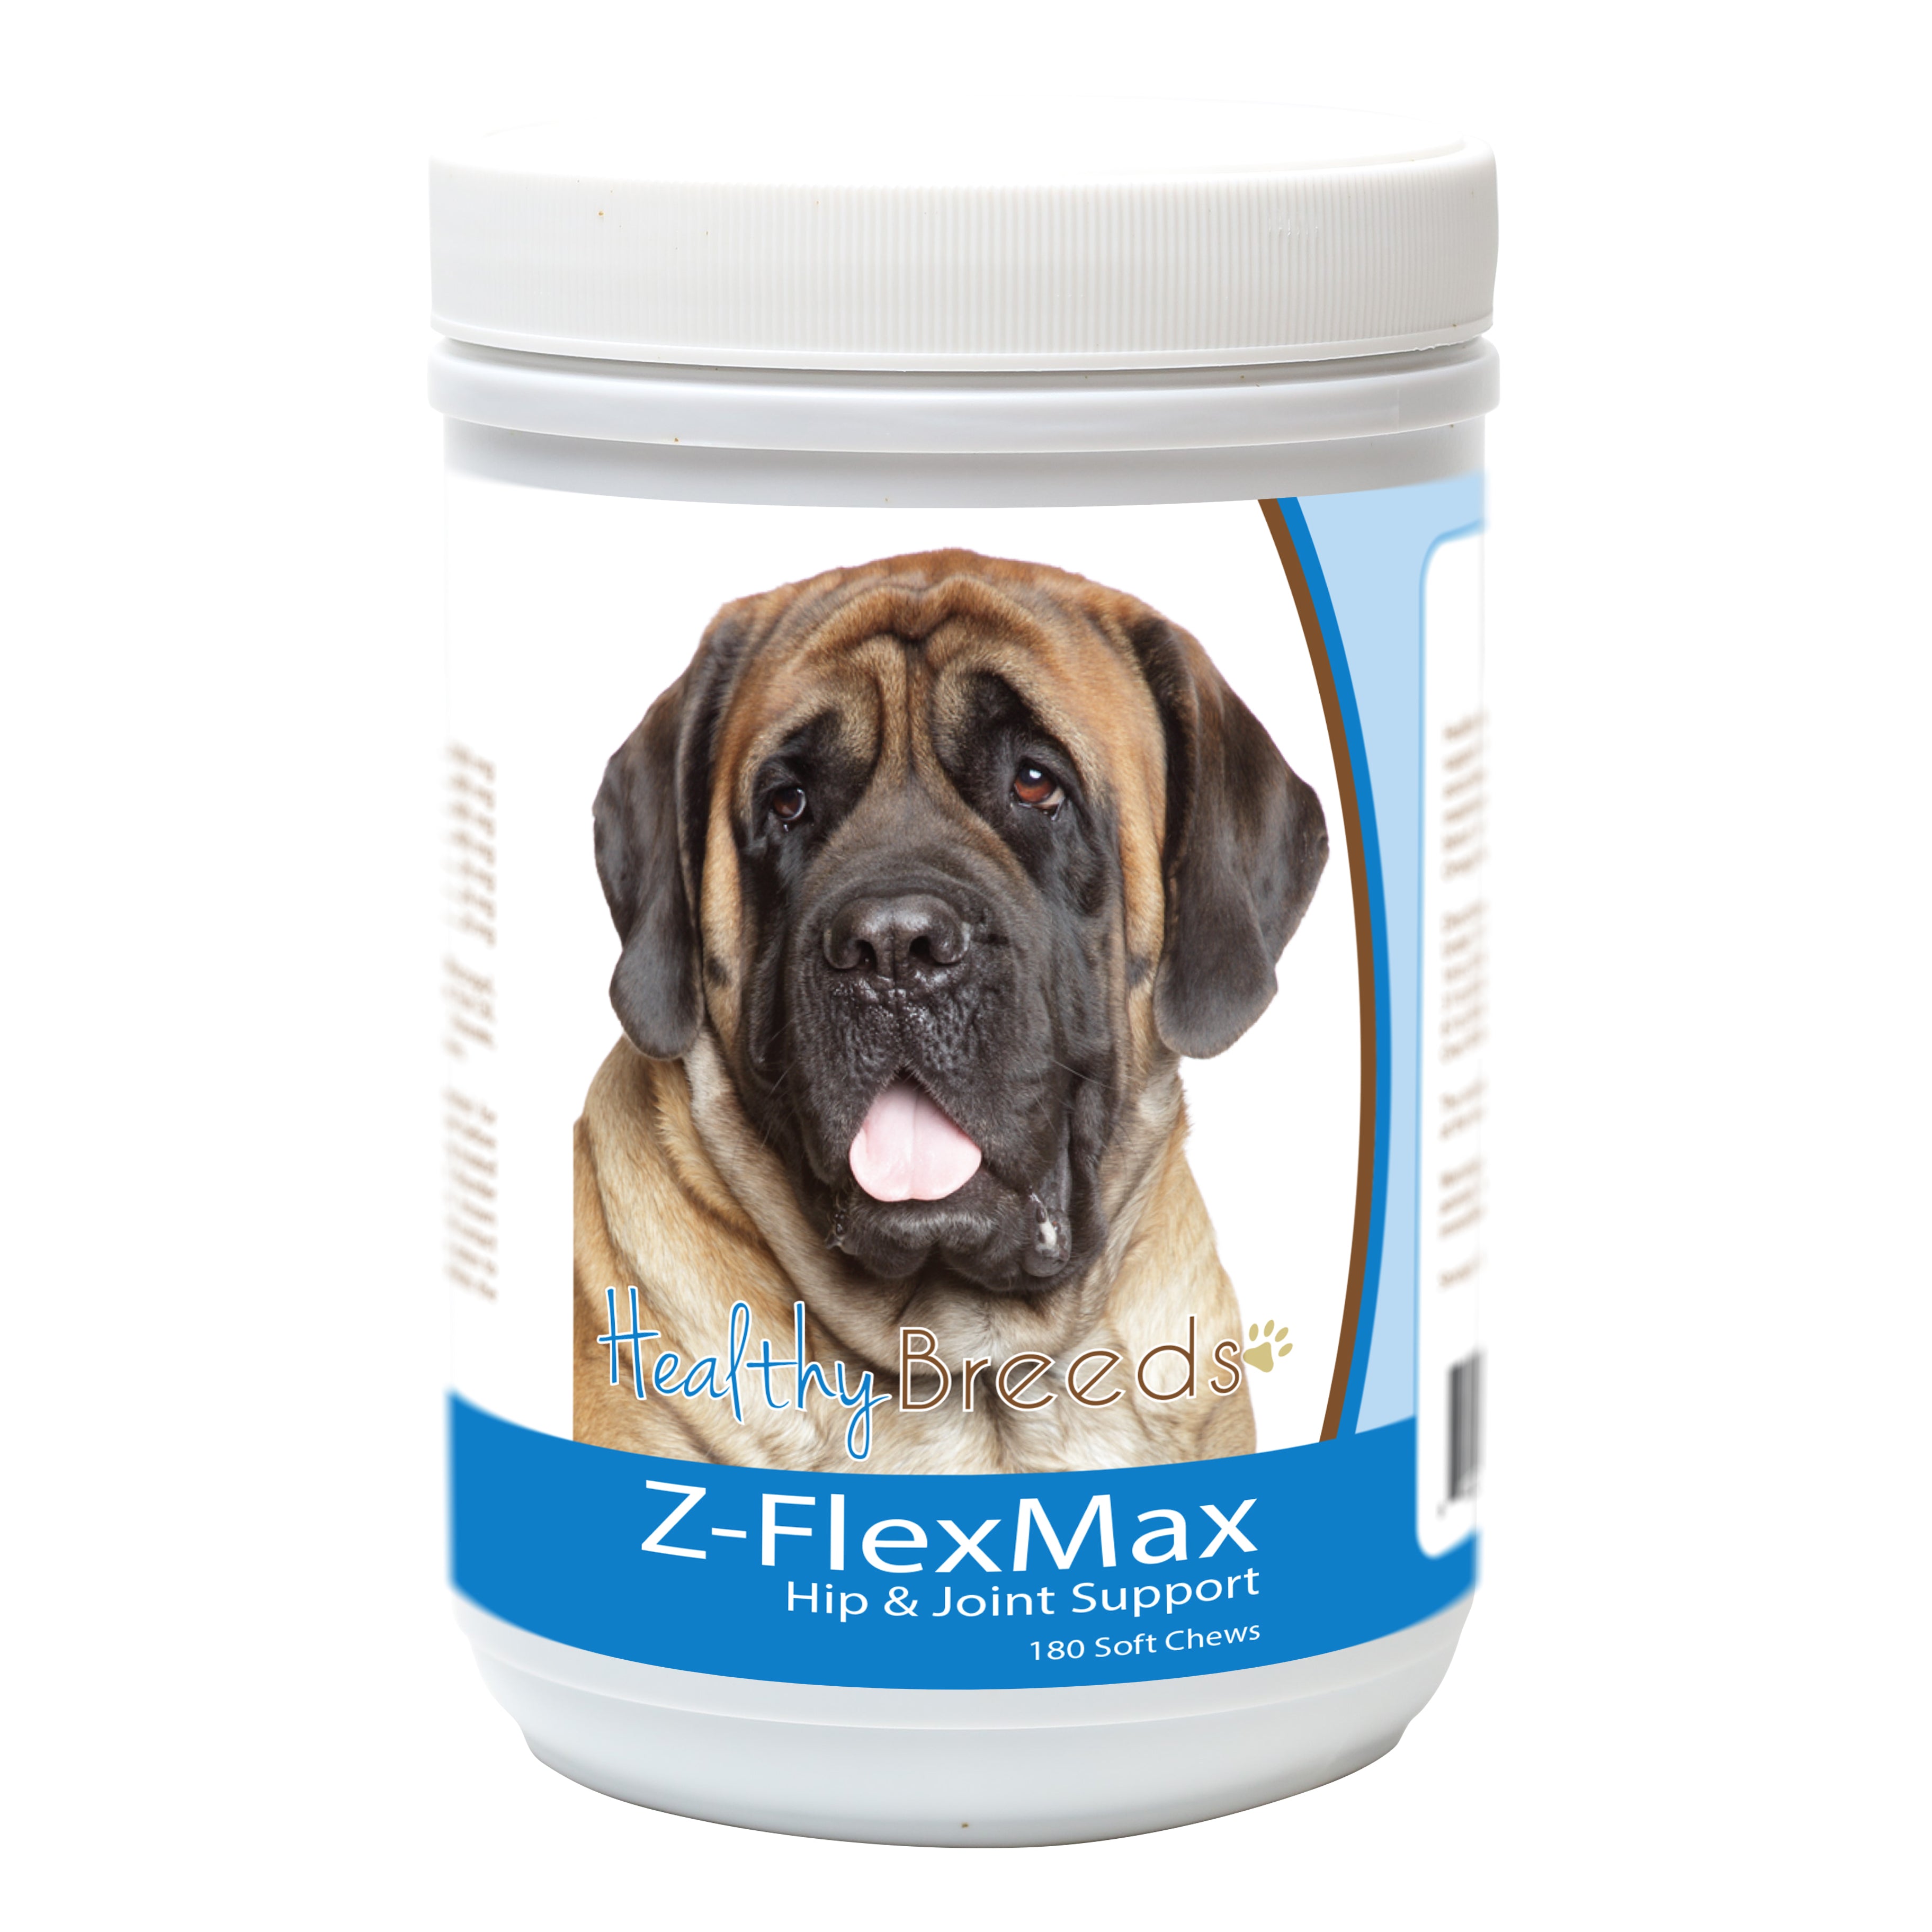 Mastiff Z-Flex Max Dog Hip and Joint Support 180 Count